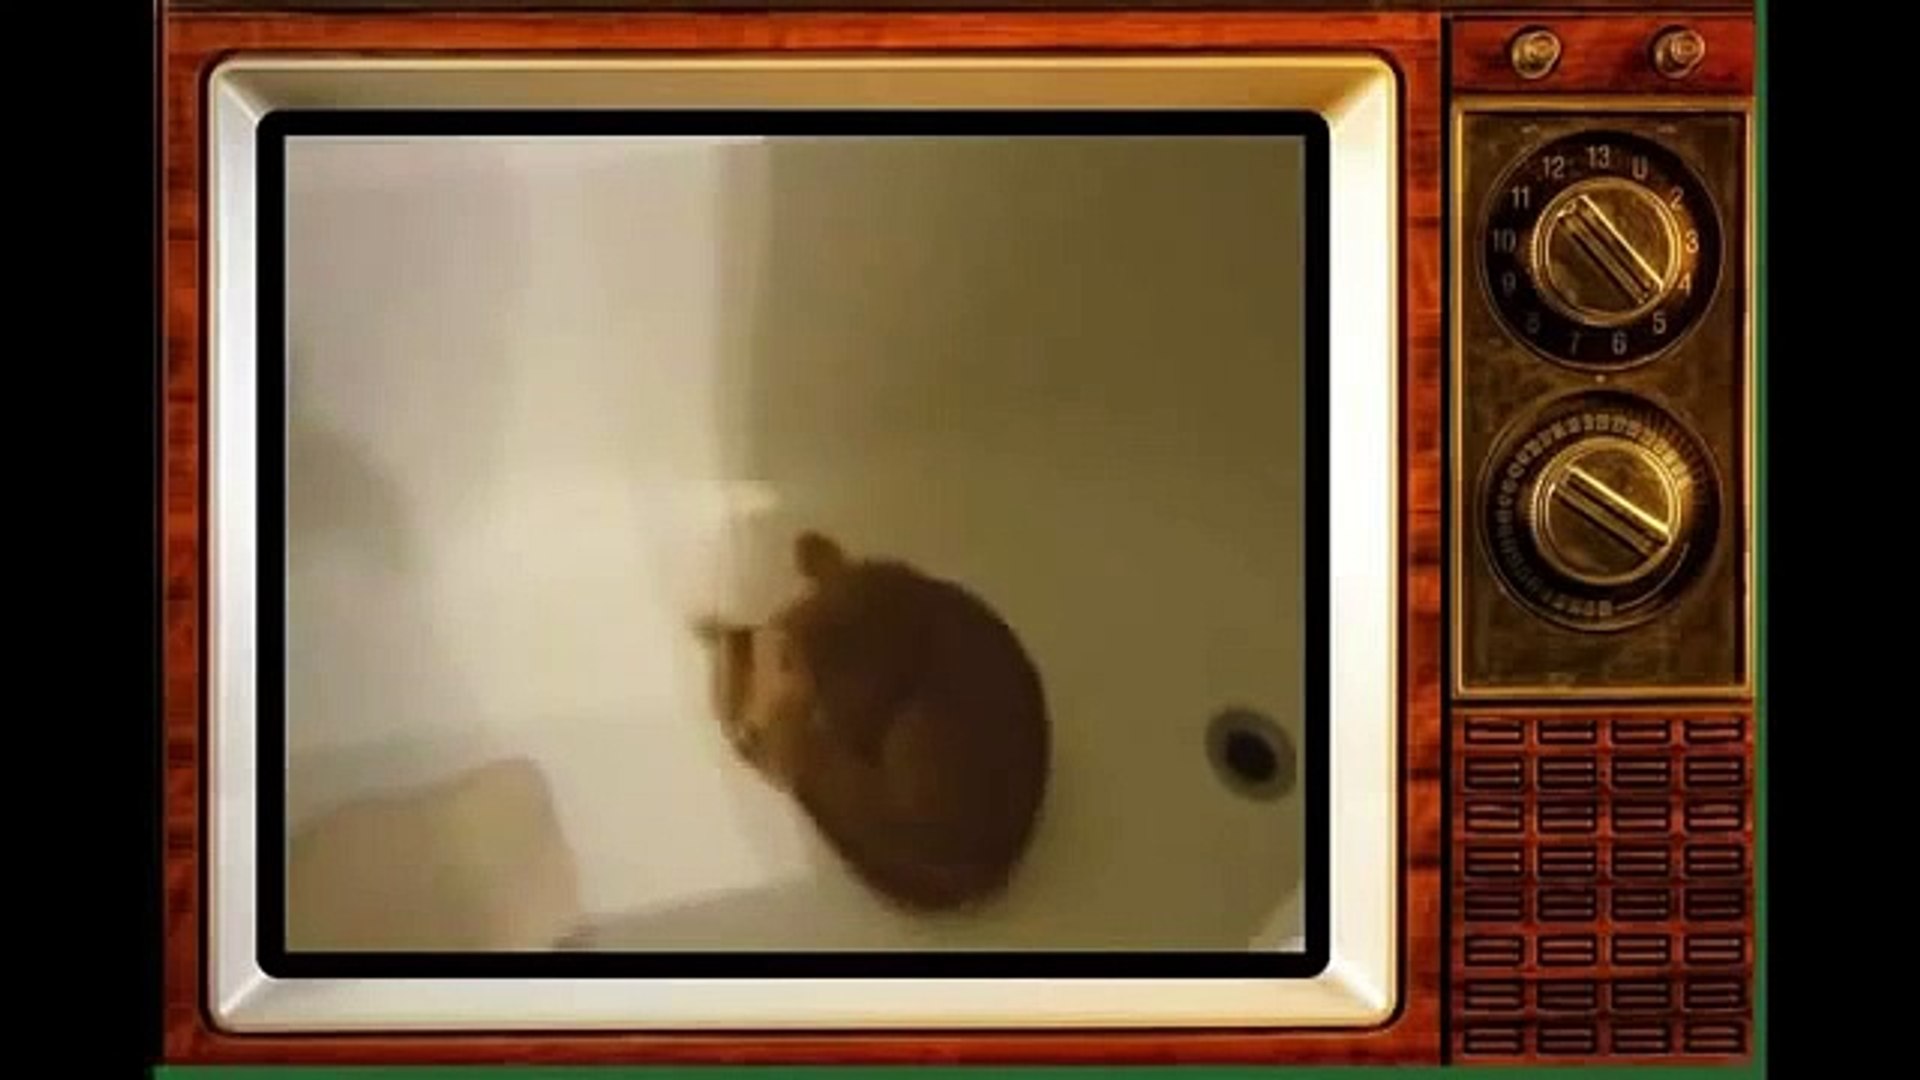 Funny Videos 2017  - Funny Cats Video - Funny Cat 2342342wrunny Animals - Funny Cats